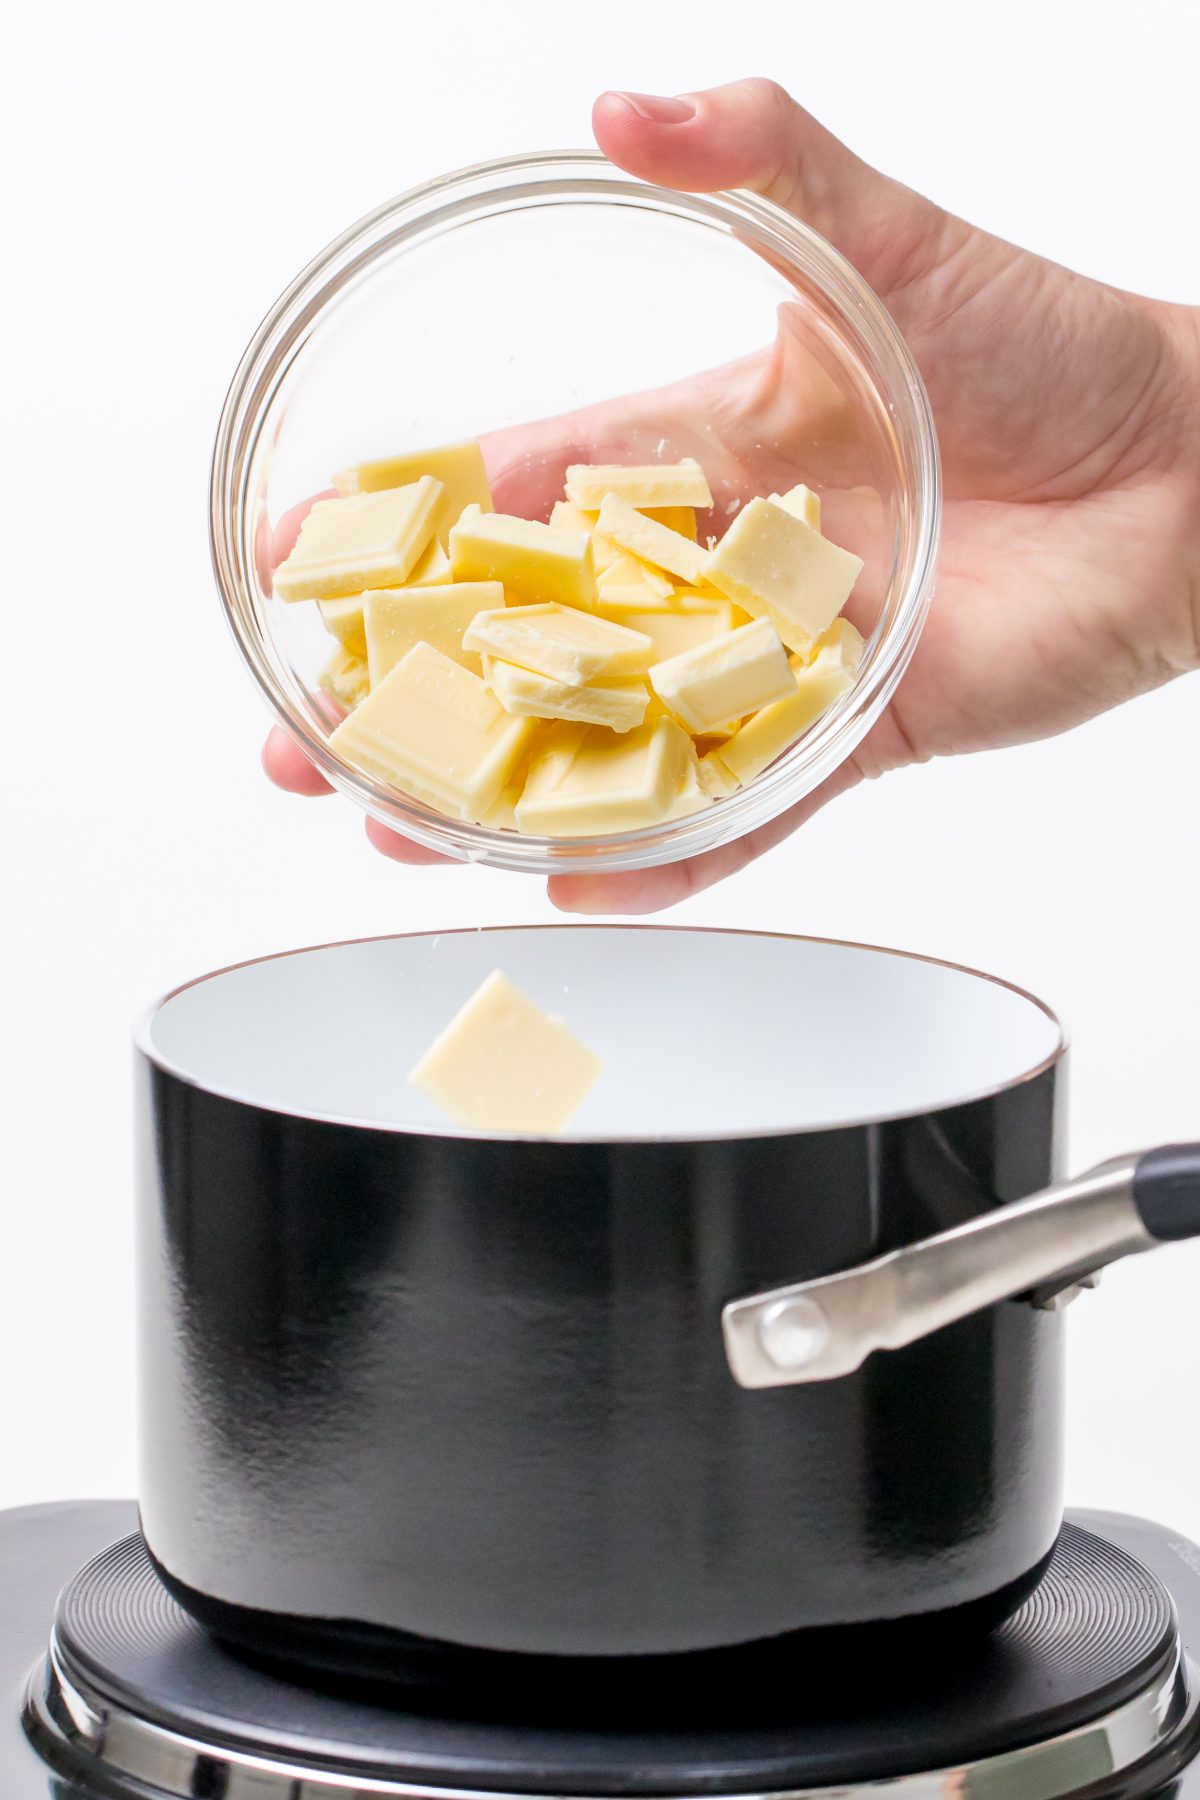 In a saucepan over low-medium heat, whisk together chopped white chocolate and a half-cup of whole milk